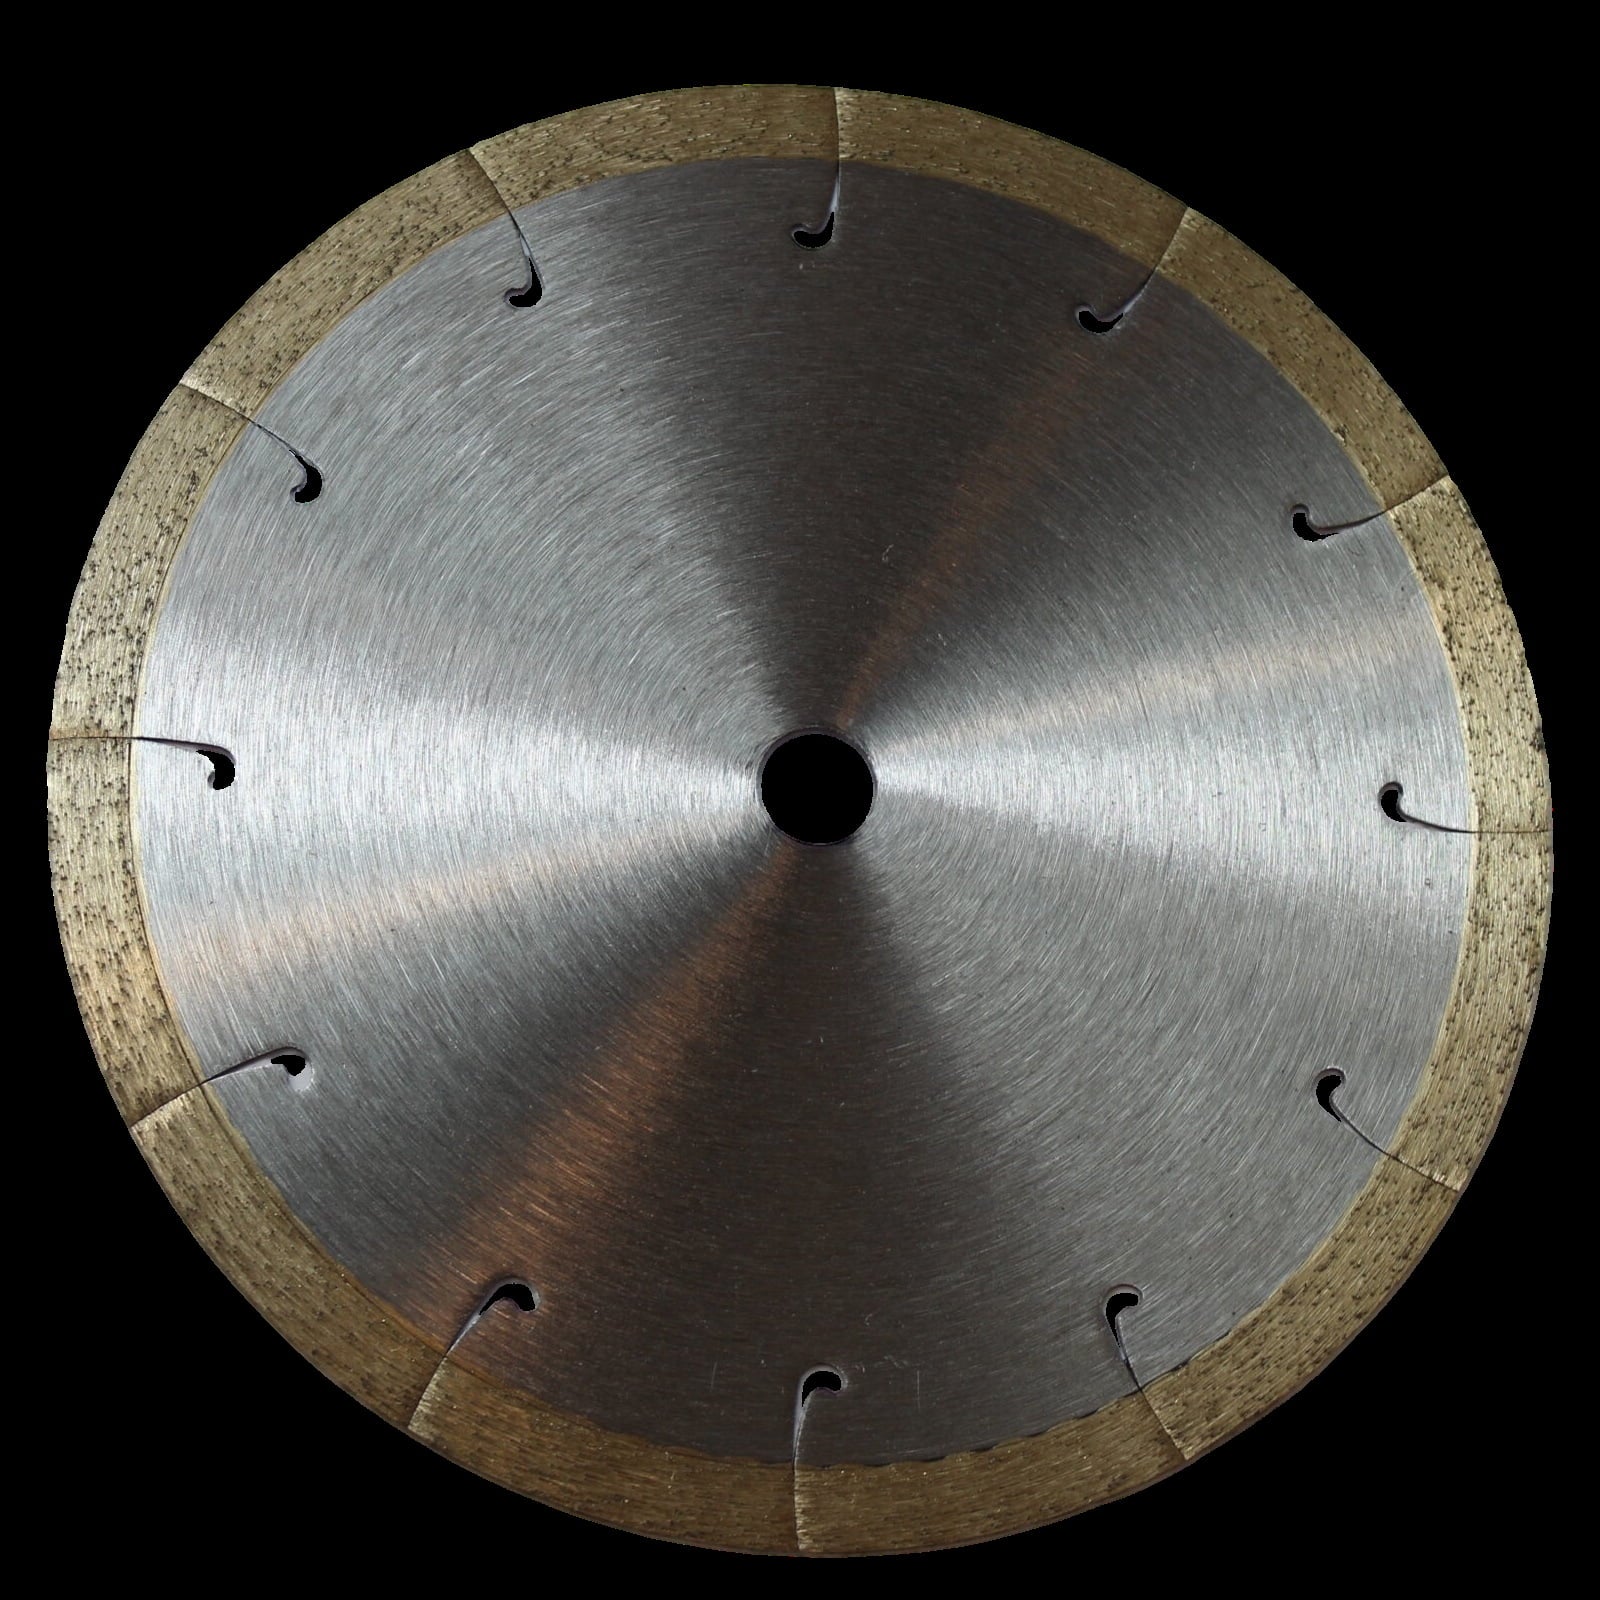 Diamond Coated Saw Blades Sawblades for Cutting Glass Ceramic Stones and More per Each | Esslinger 49.210